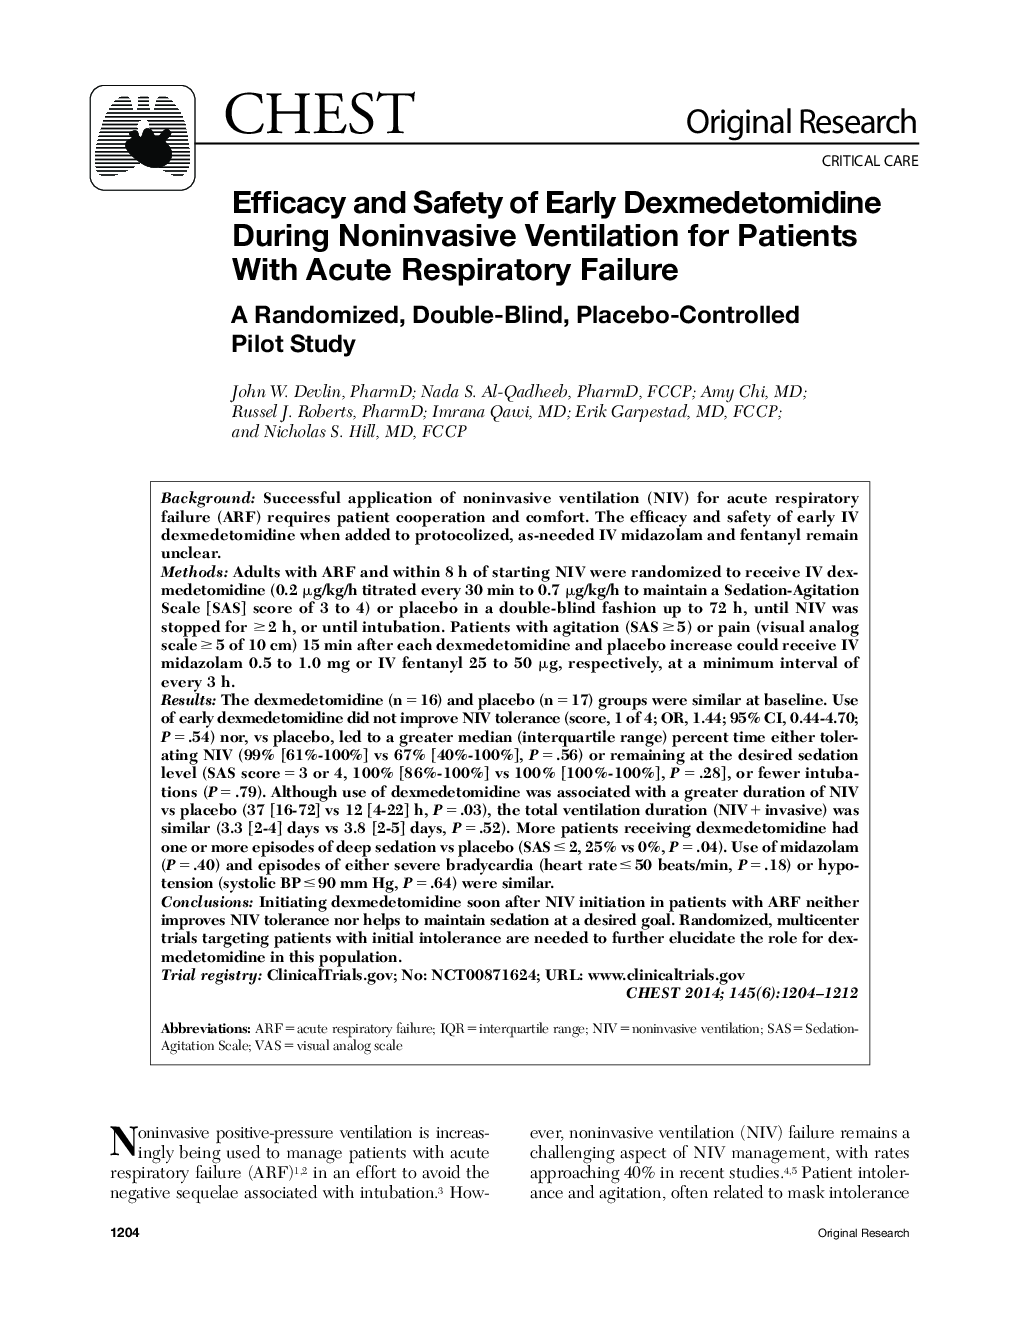 Efficacy and Safety of Early Dexmedetomidine During Noninvasive Ventilation for Patients With Acute Respiratory Failure